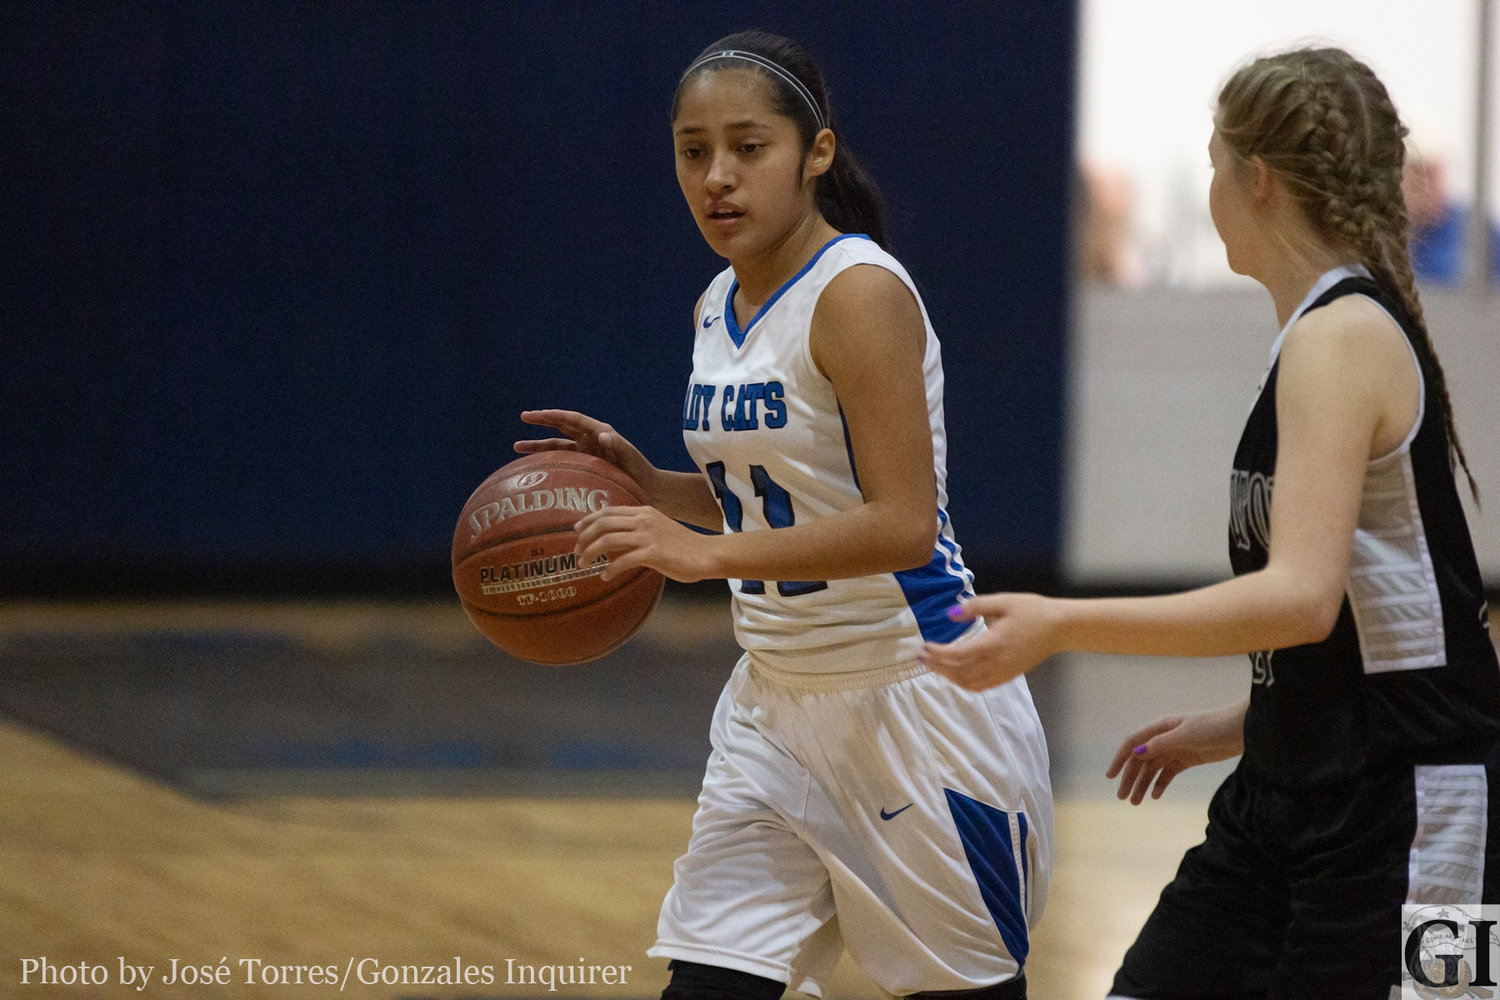 Fatima Torres (11) dribbles through a defender in Tuesday’s 54-11 to #11 Moulton. Torres finished with two points, both from the free-throw line.